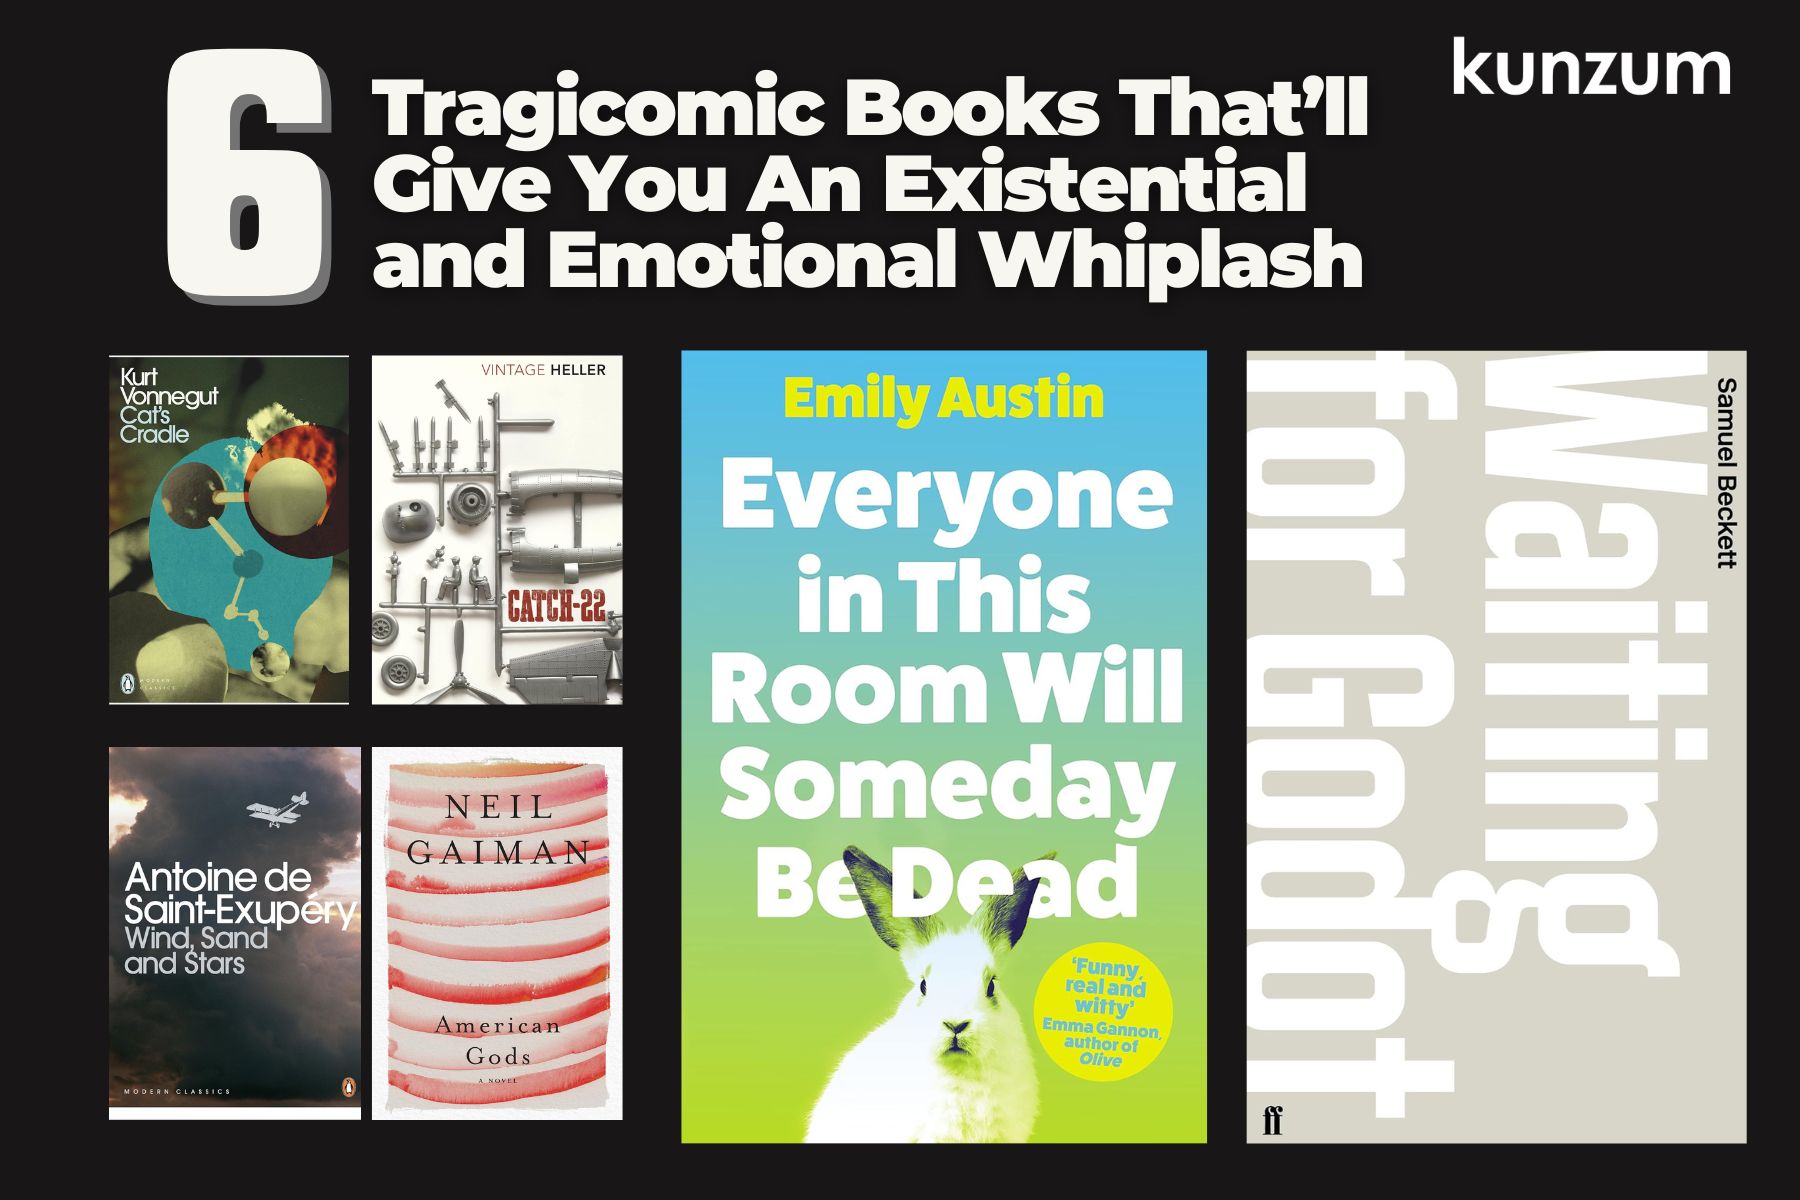 6 Tragicomic Books That’ll Give You An Existential and Emotional Whiplash